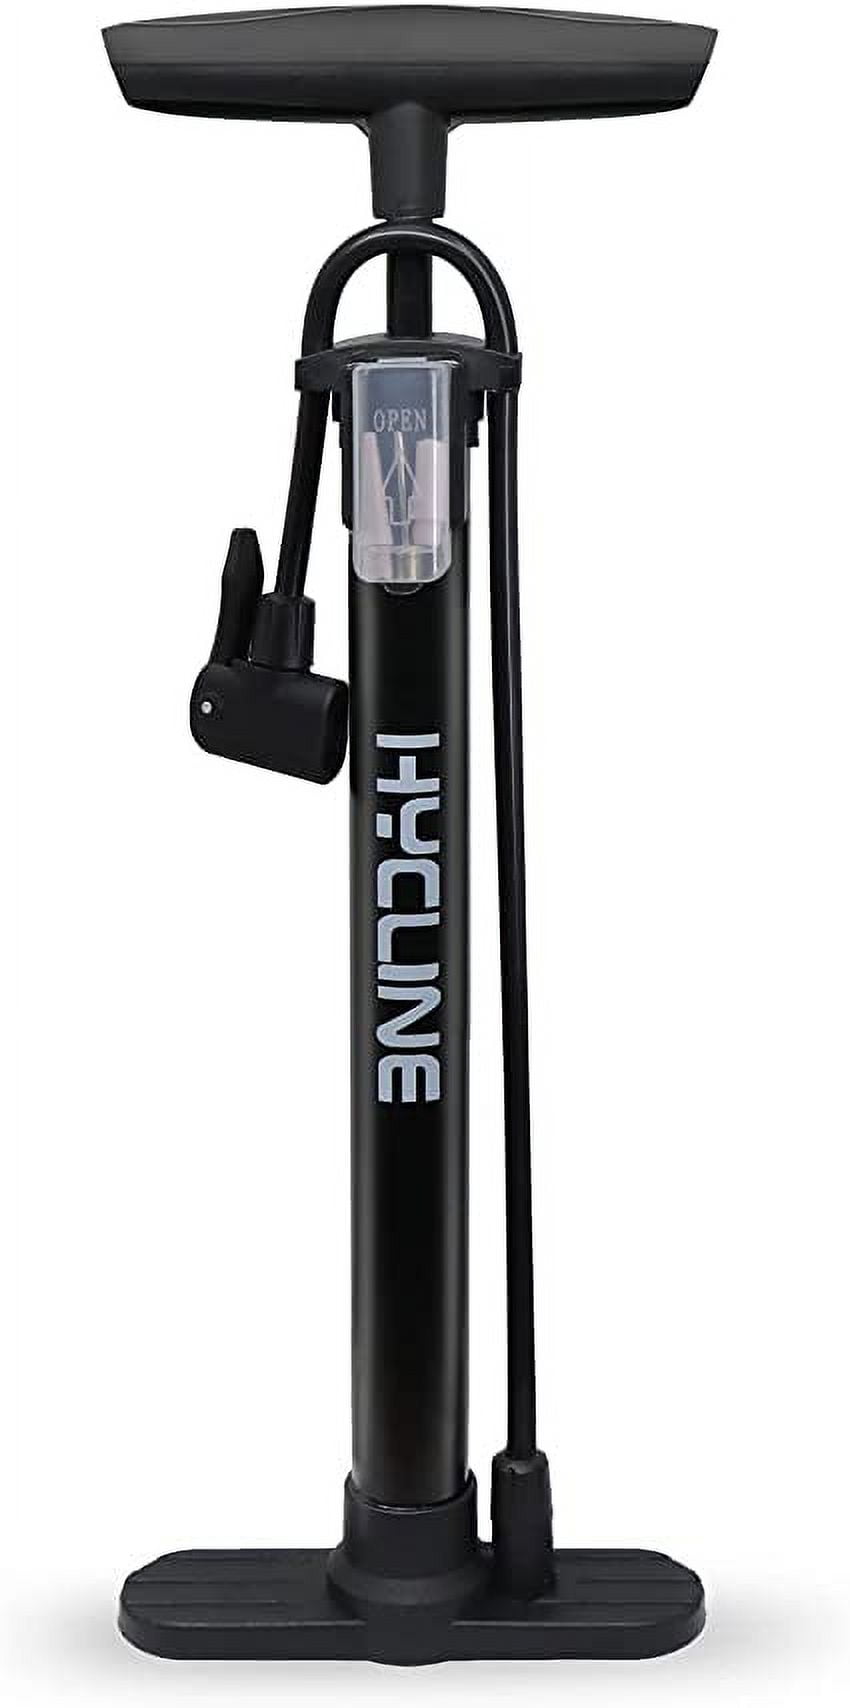 Hycline Bike Pump, Floor Bicycle Tire Pump, 150/160 PSI High Pressure Air  Pumps with Presta and Schrader Valve for Road Mountain Bike Tires, Balls